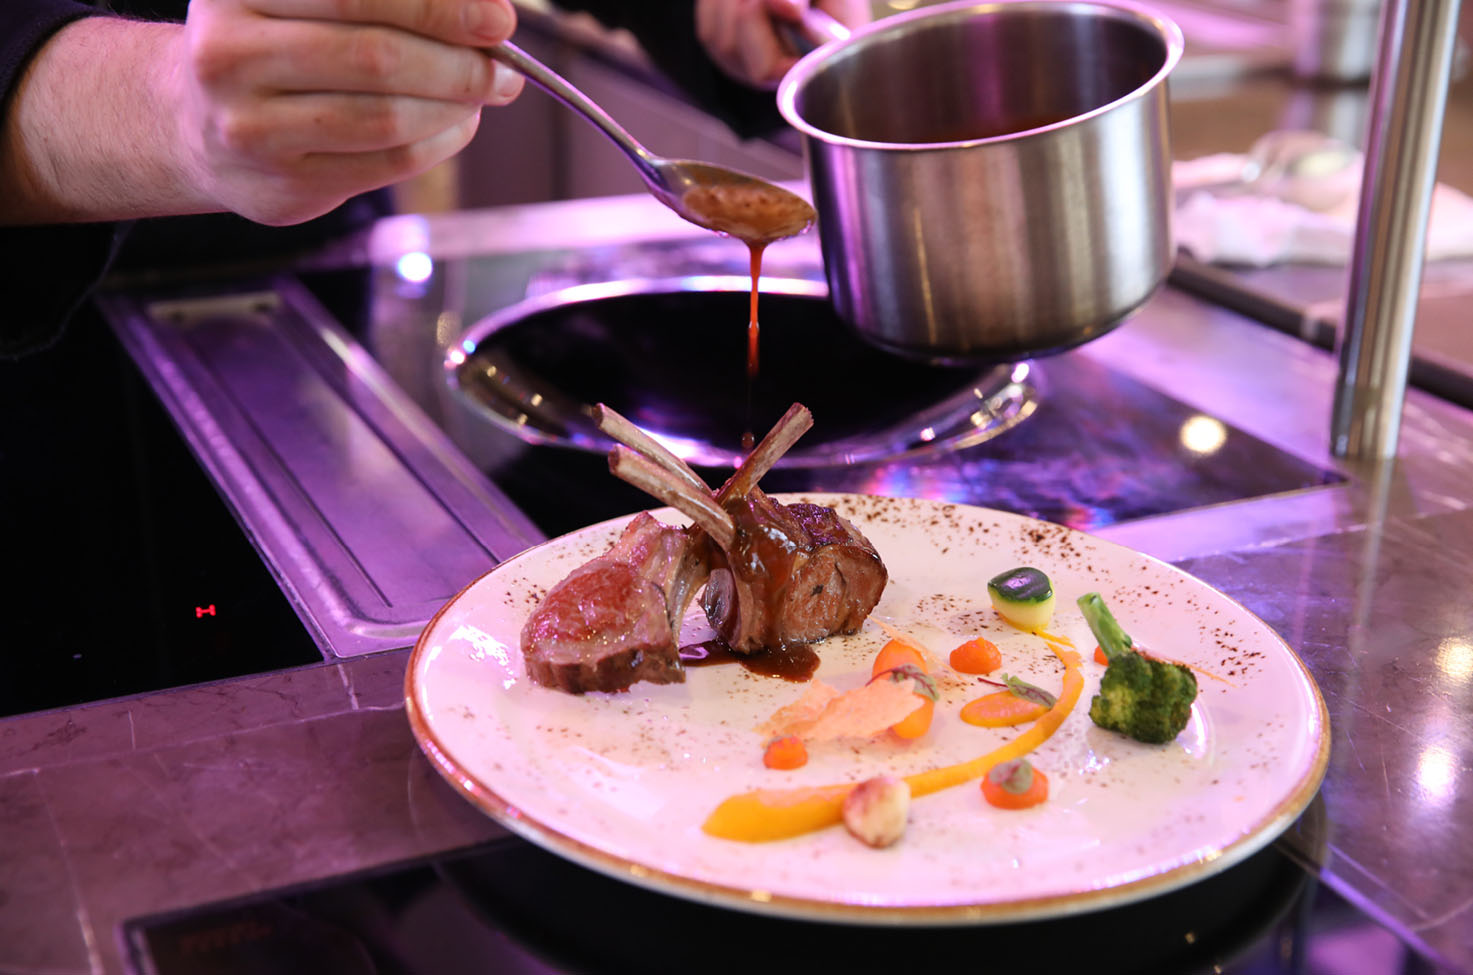 Sauce is drizzled over lamb cutlets presented neatly with various vegetables and other sauces on a white plate